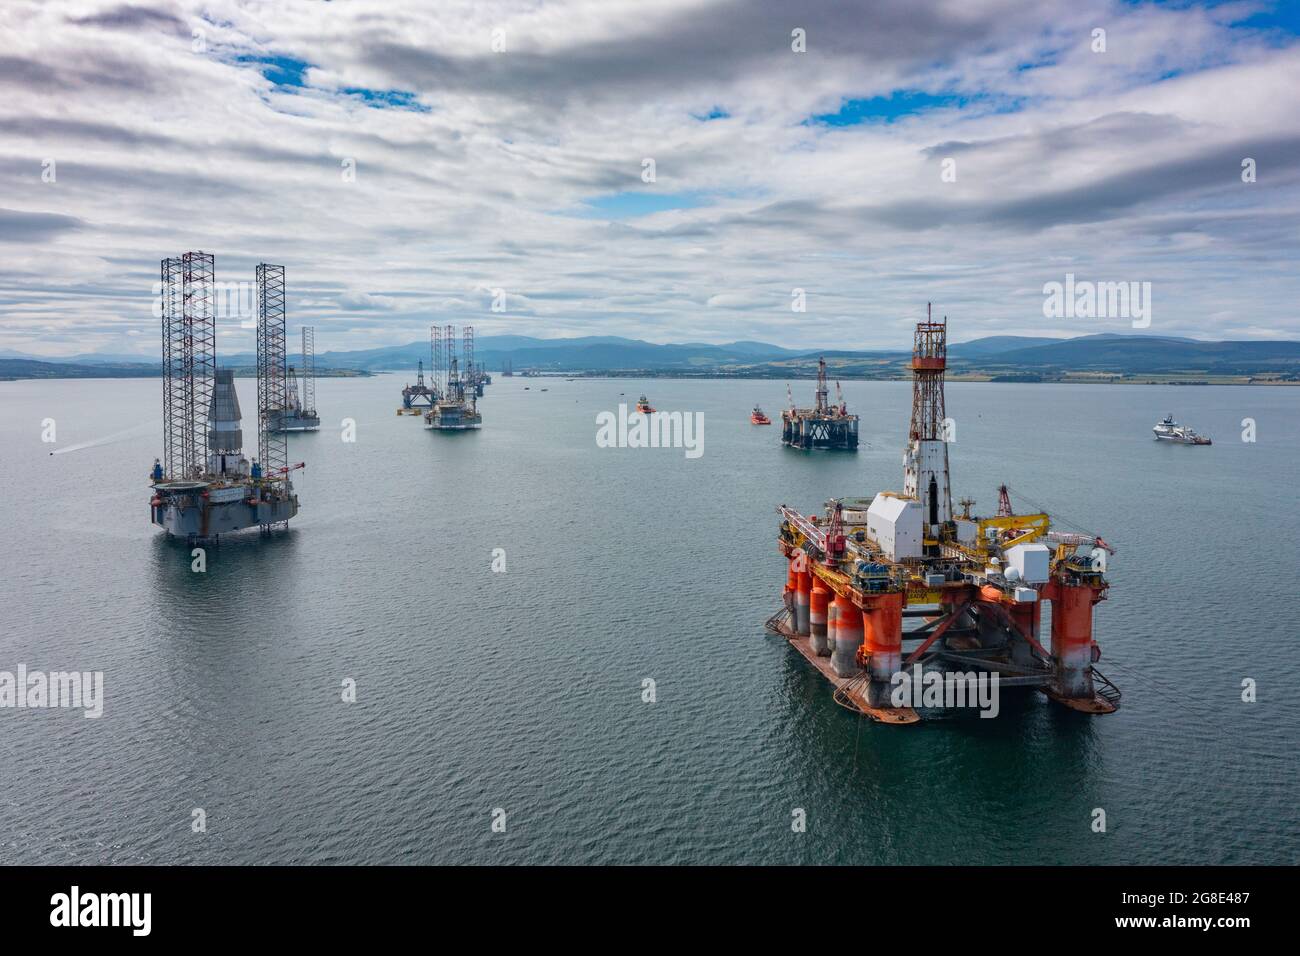 North Sea Oil and gas industry platforms and drilling rigs mothballed and moored in Nigg Bay in Cromarty Firth, Ross and Cromarty, Scotland, UK Stock Photo